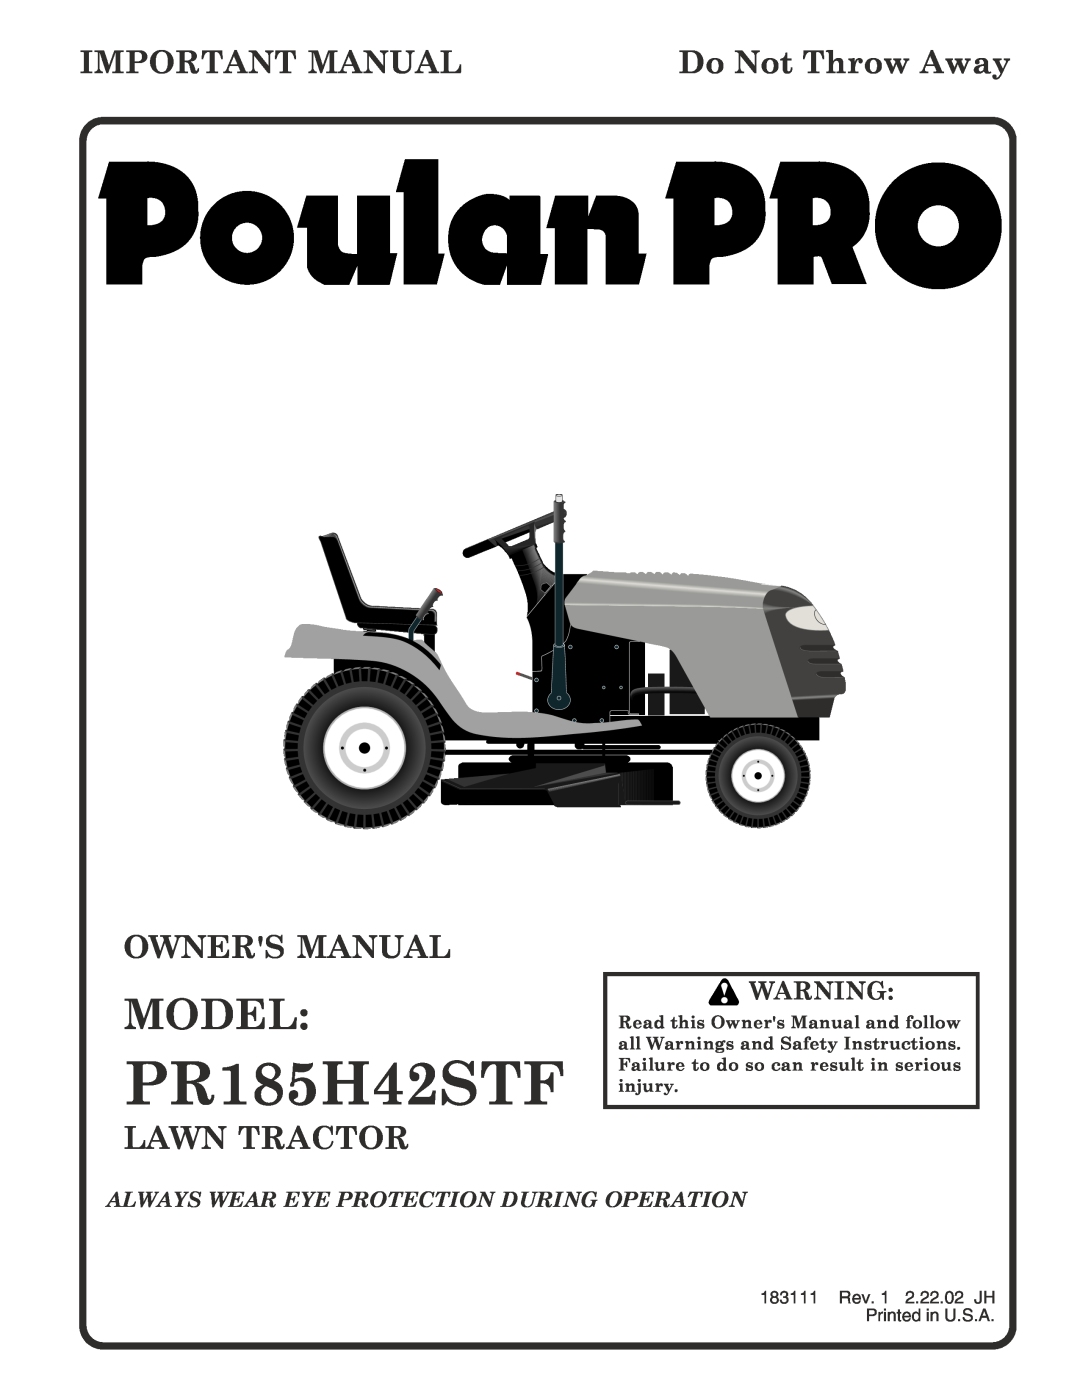 Poulan PR185H42STF owner manual Model, Important Manual, Do Not Throw Away, Lawn Tractor 